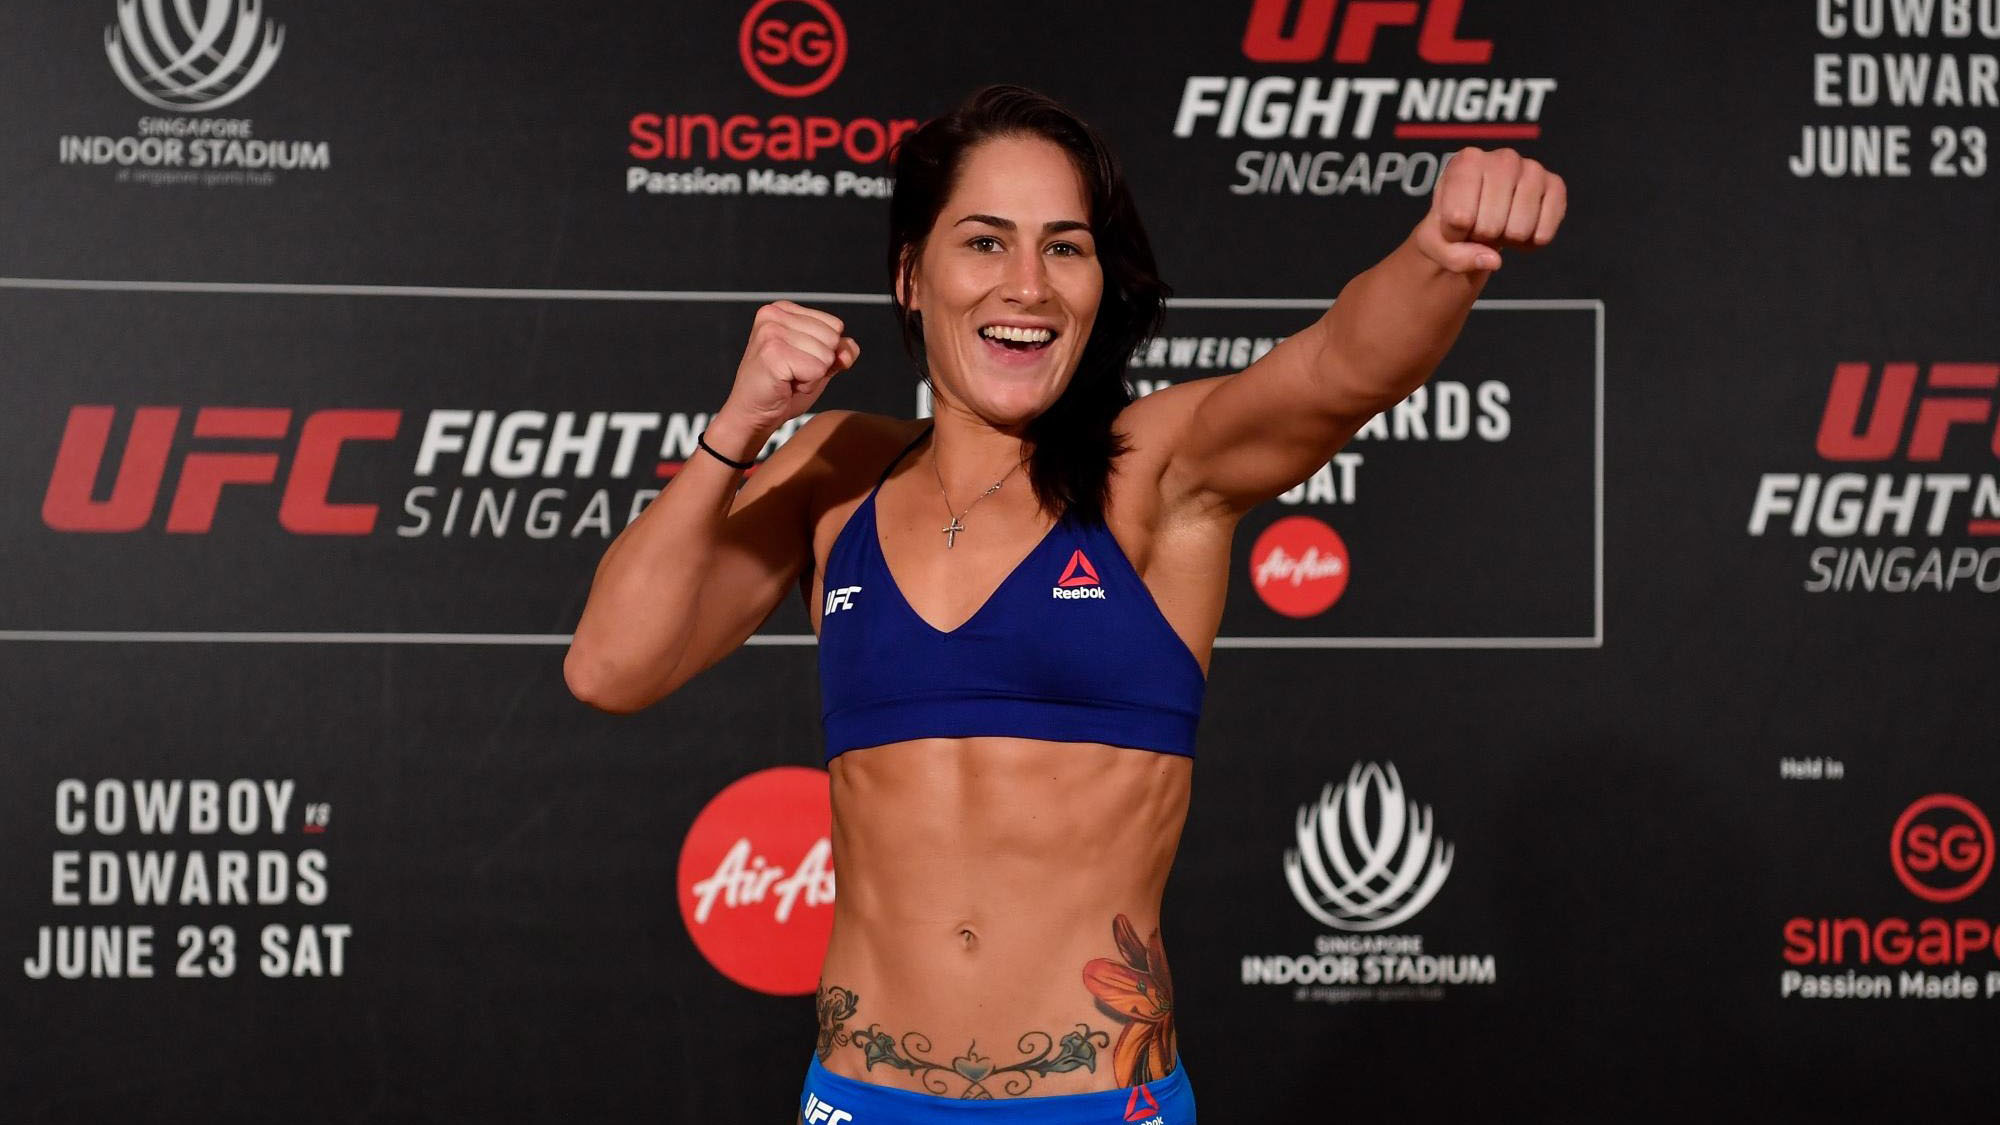 Jessica Jo-Anne Eye (born July 27, 1986) is an American professional mixed martial artist. She competes as a flyweight in the Ultimate Fighting Champi...